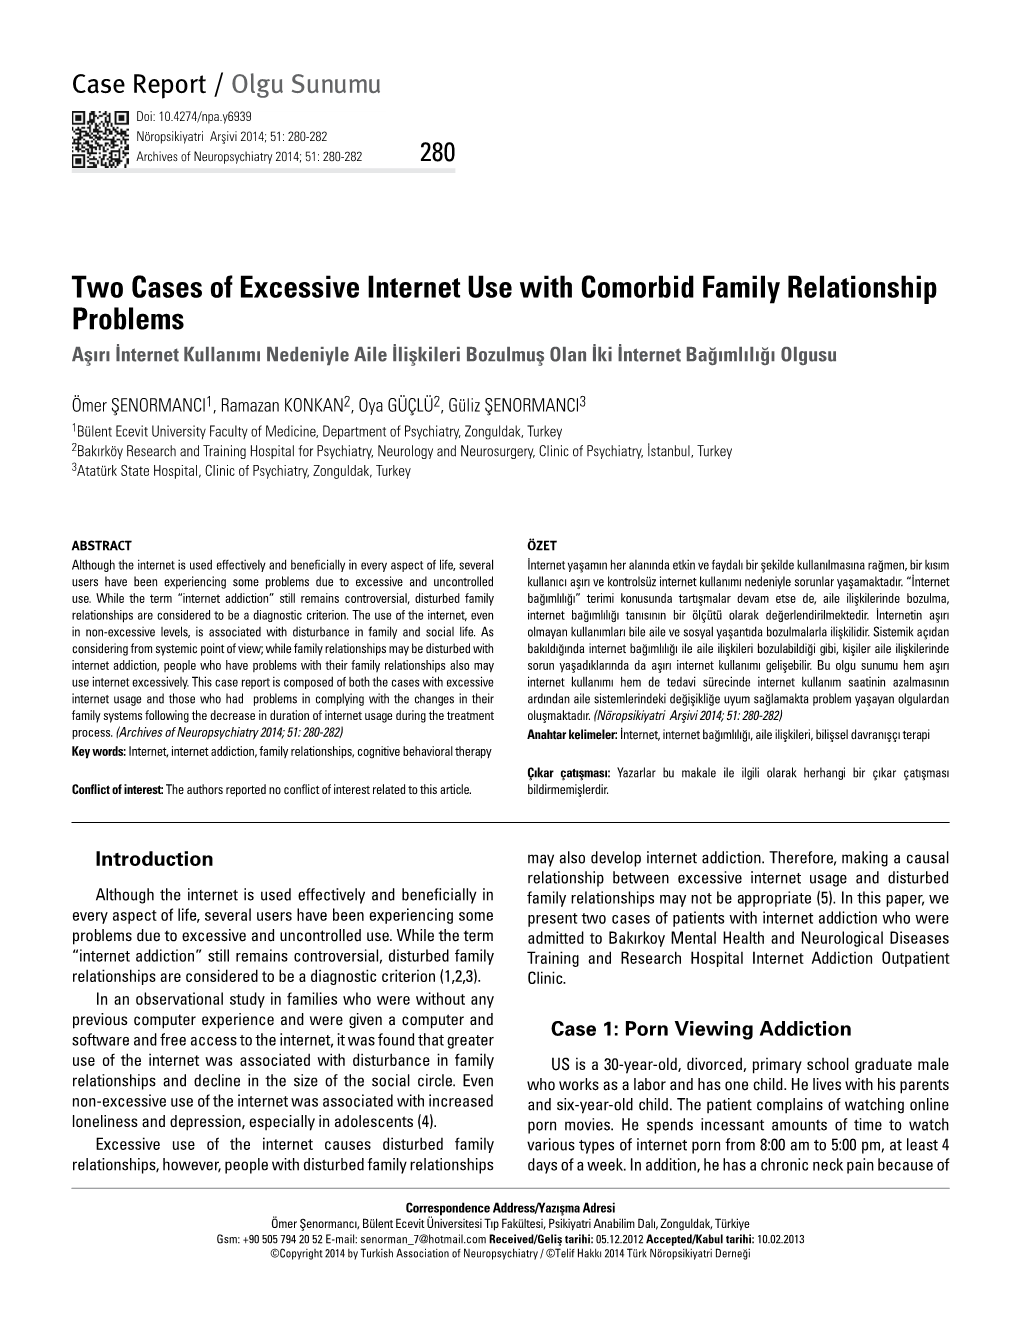 Two Cases of Excessive Internet Use with Comorbid Family Relationship